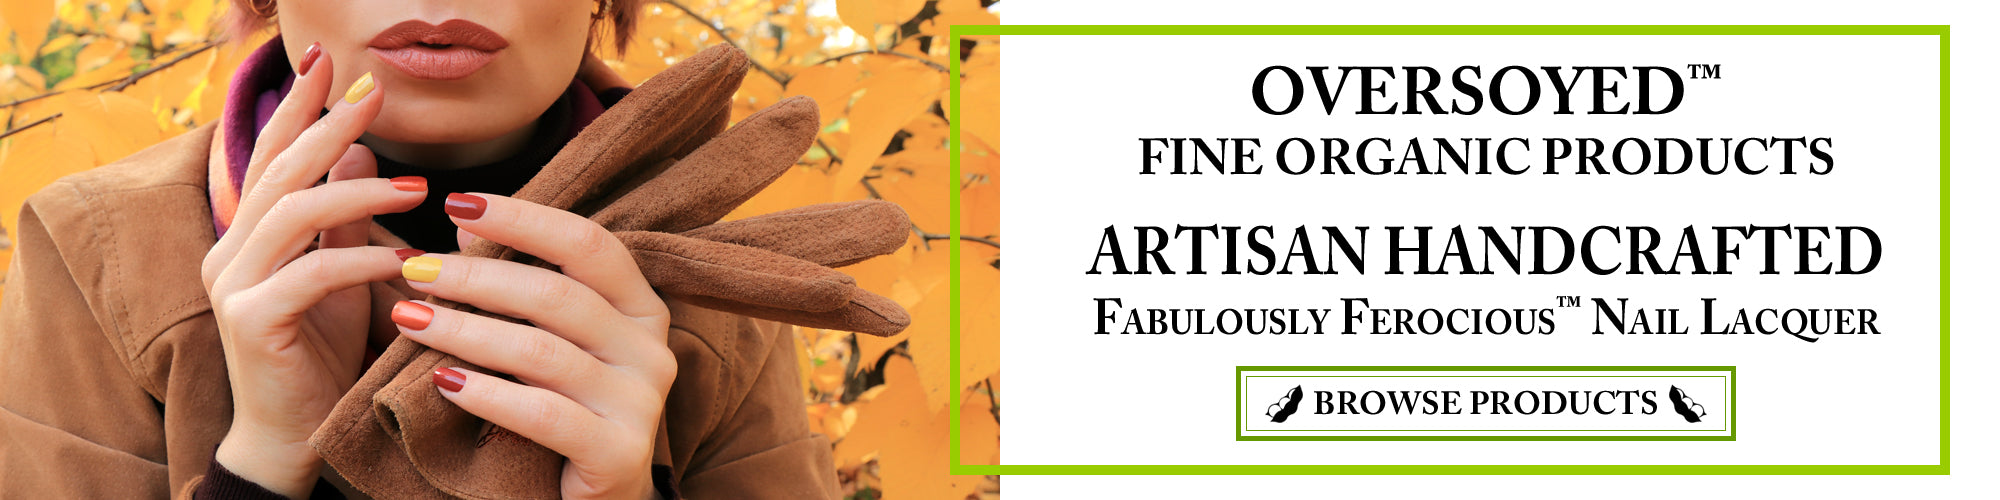 OverSoyed Fine Organic Products - Fabulously Ferocious™ Artisan Handcrafted Nail Polish & Lacquer